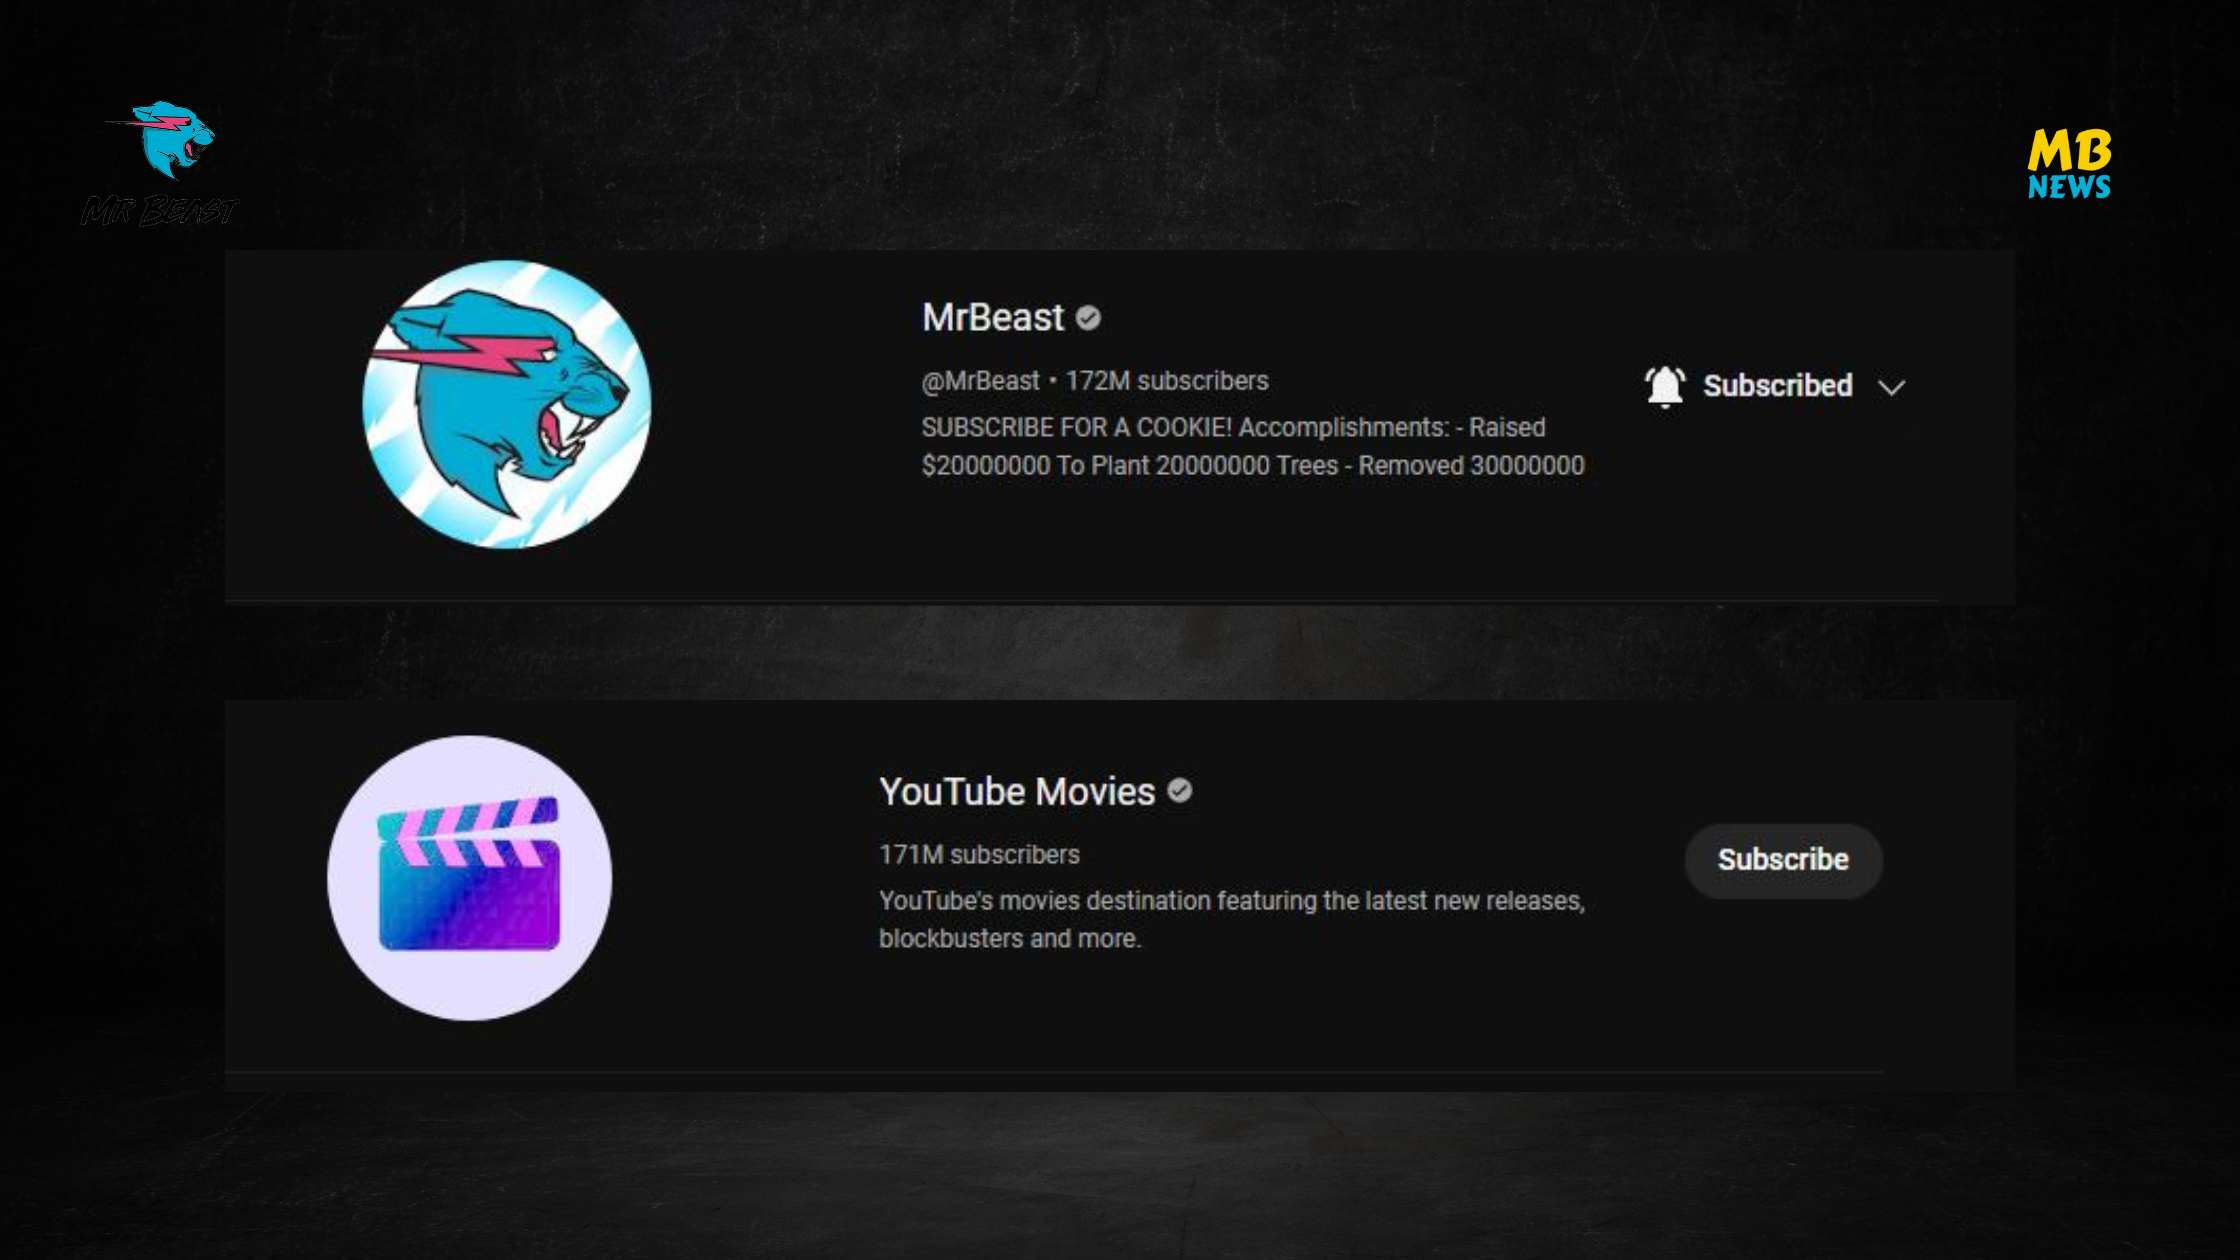 MrBeast's YouTube Channel Surpasses "YouTube Movies" with 172 Million Subscribers!